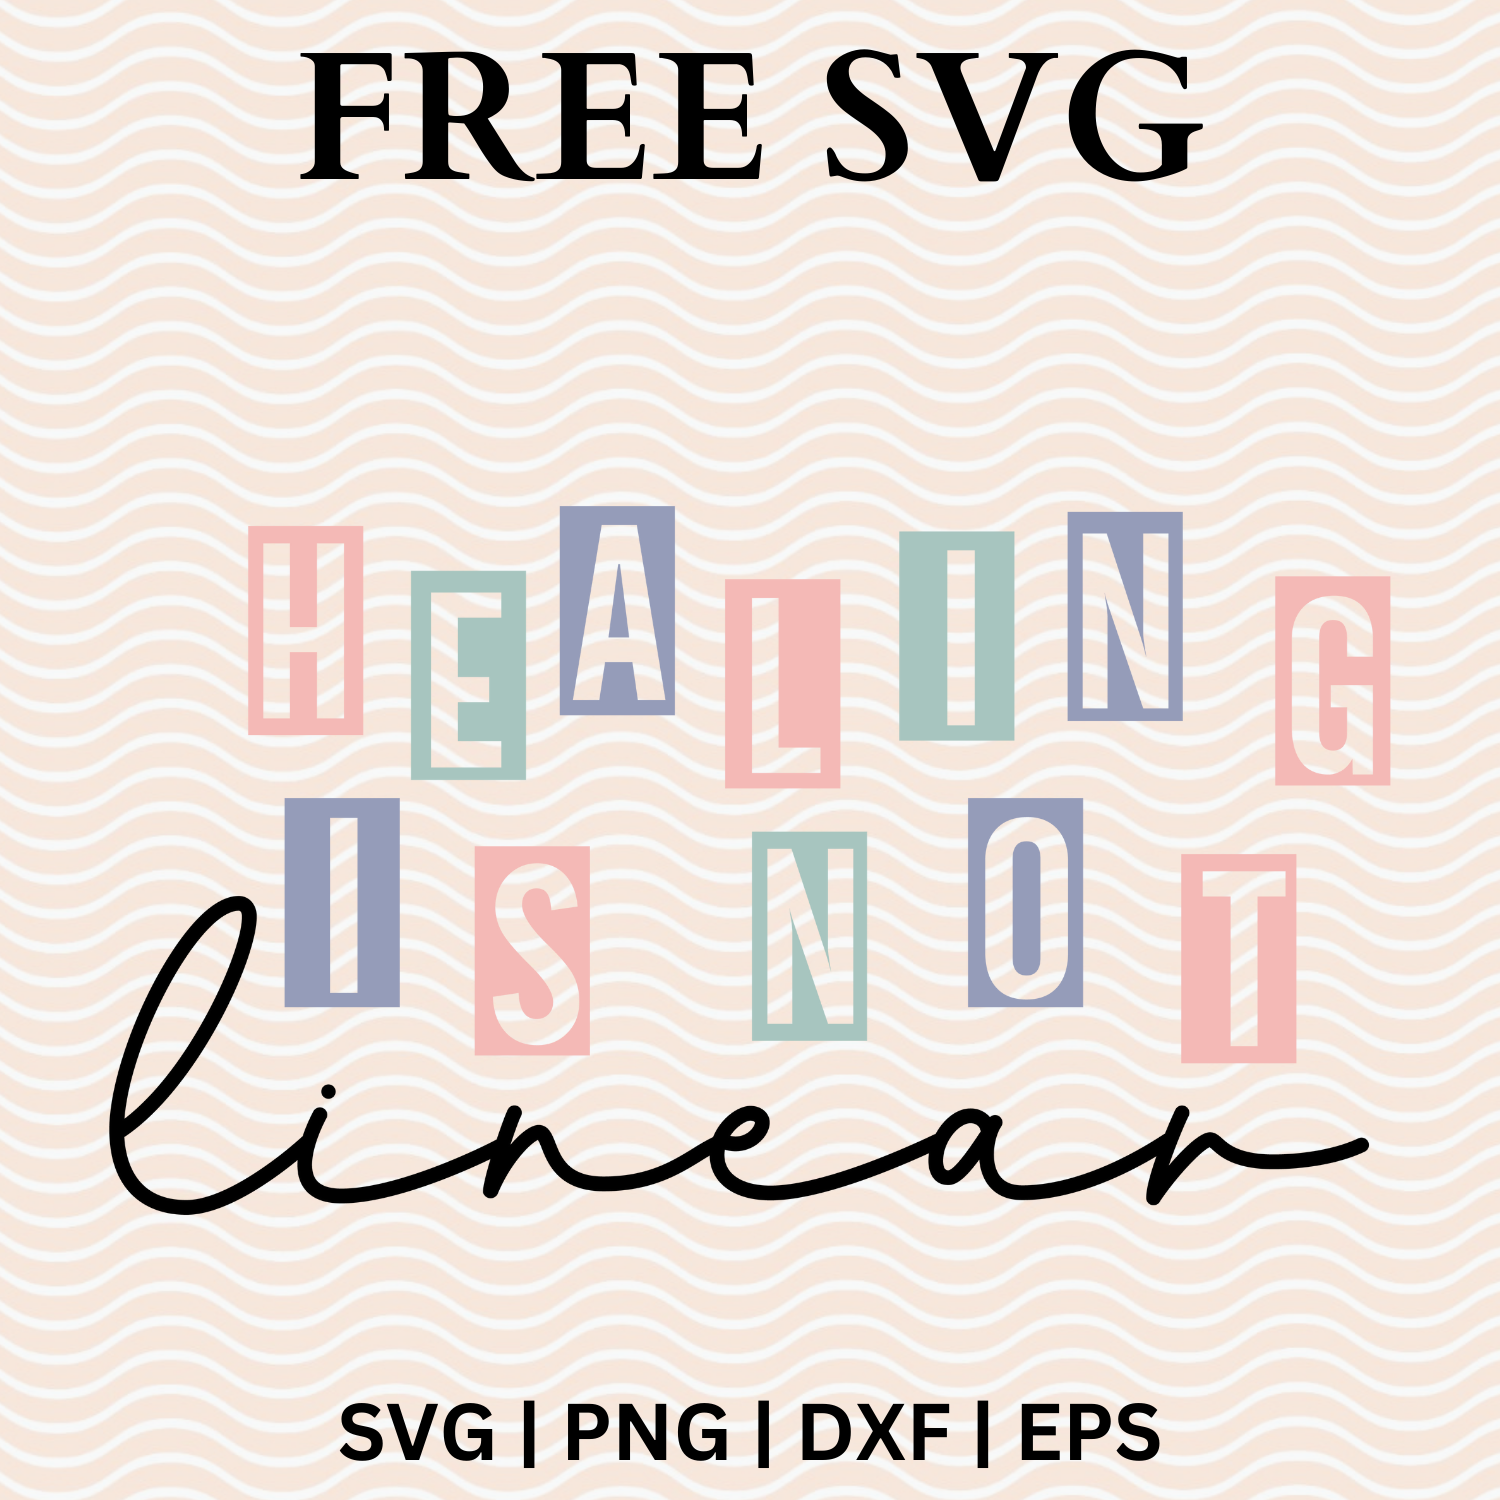 Healing is not Linear SVG Free File For Cricut & PNG Download-8SVG